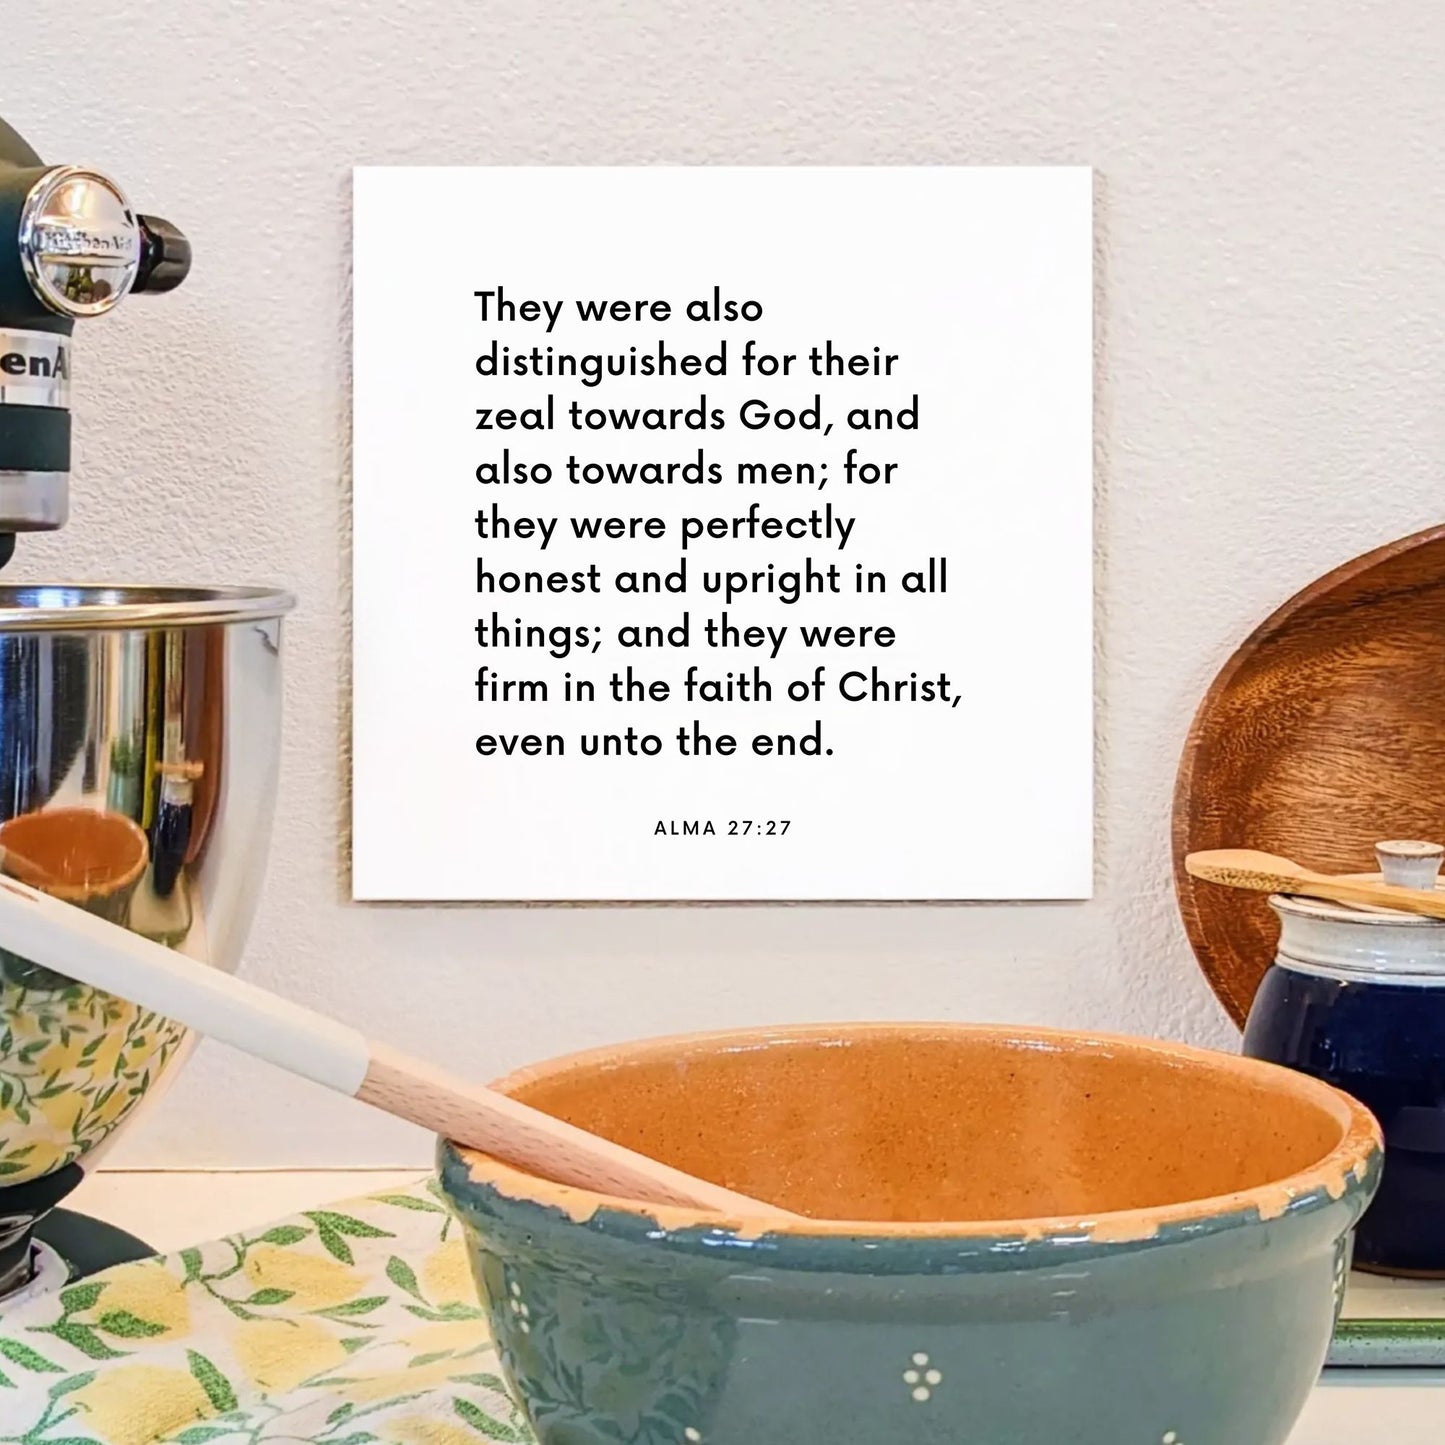 Kitchen mouting of the scripture tile for Alma 27:27 - "They were perfectly honest and upright in all things"